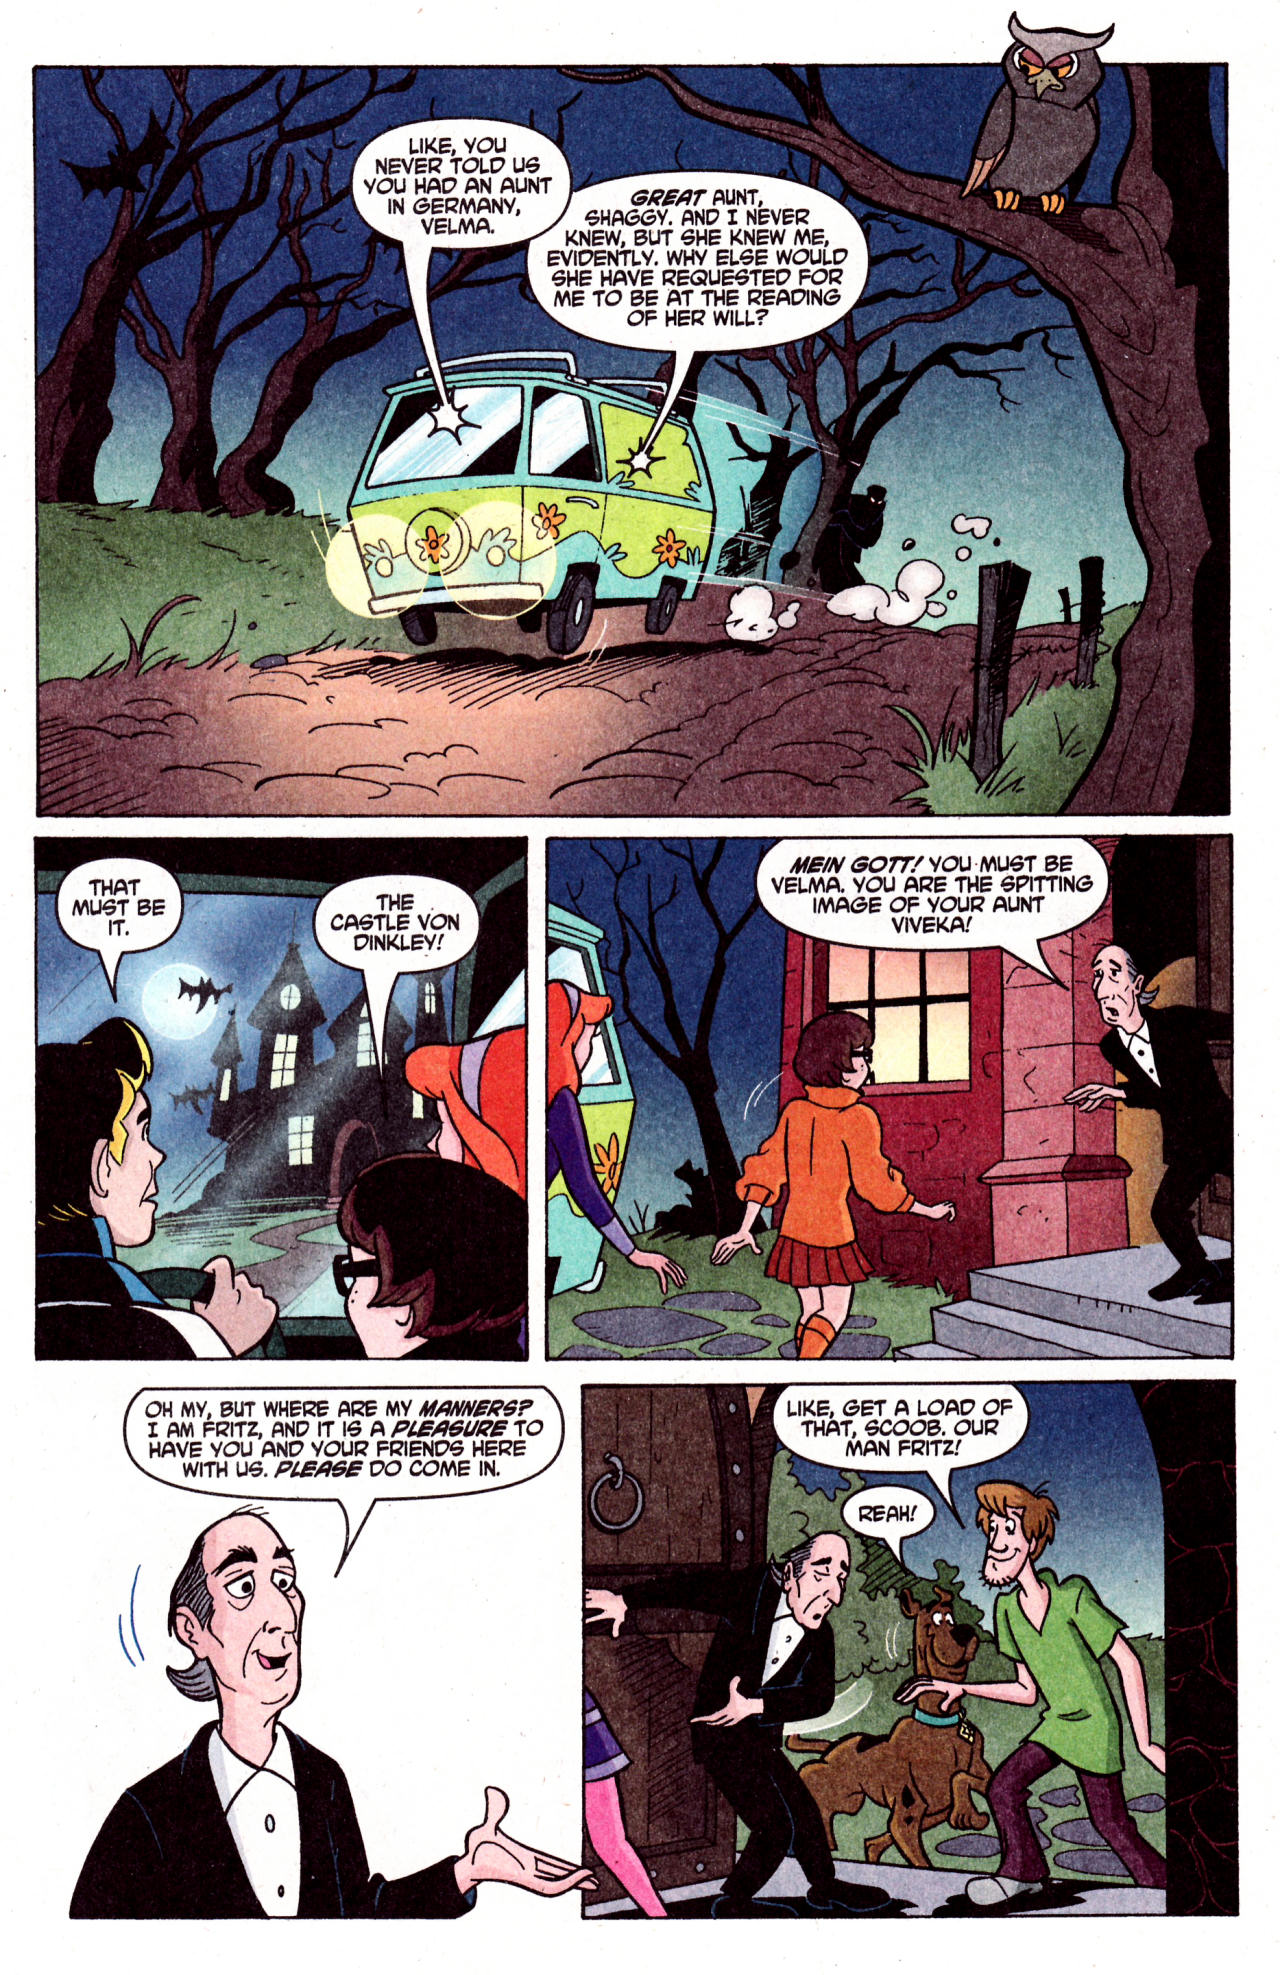 Scooby Doo 1997 Issue 127 | Read Scooby Doo 1997 Issue 127 comic online in  high quality. Read Full Comic online for free - Read comics online in high  quality .| READ COMIC ONLINE